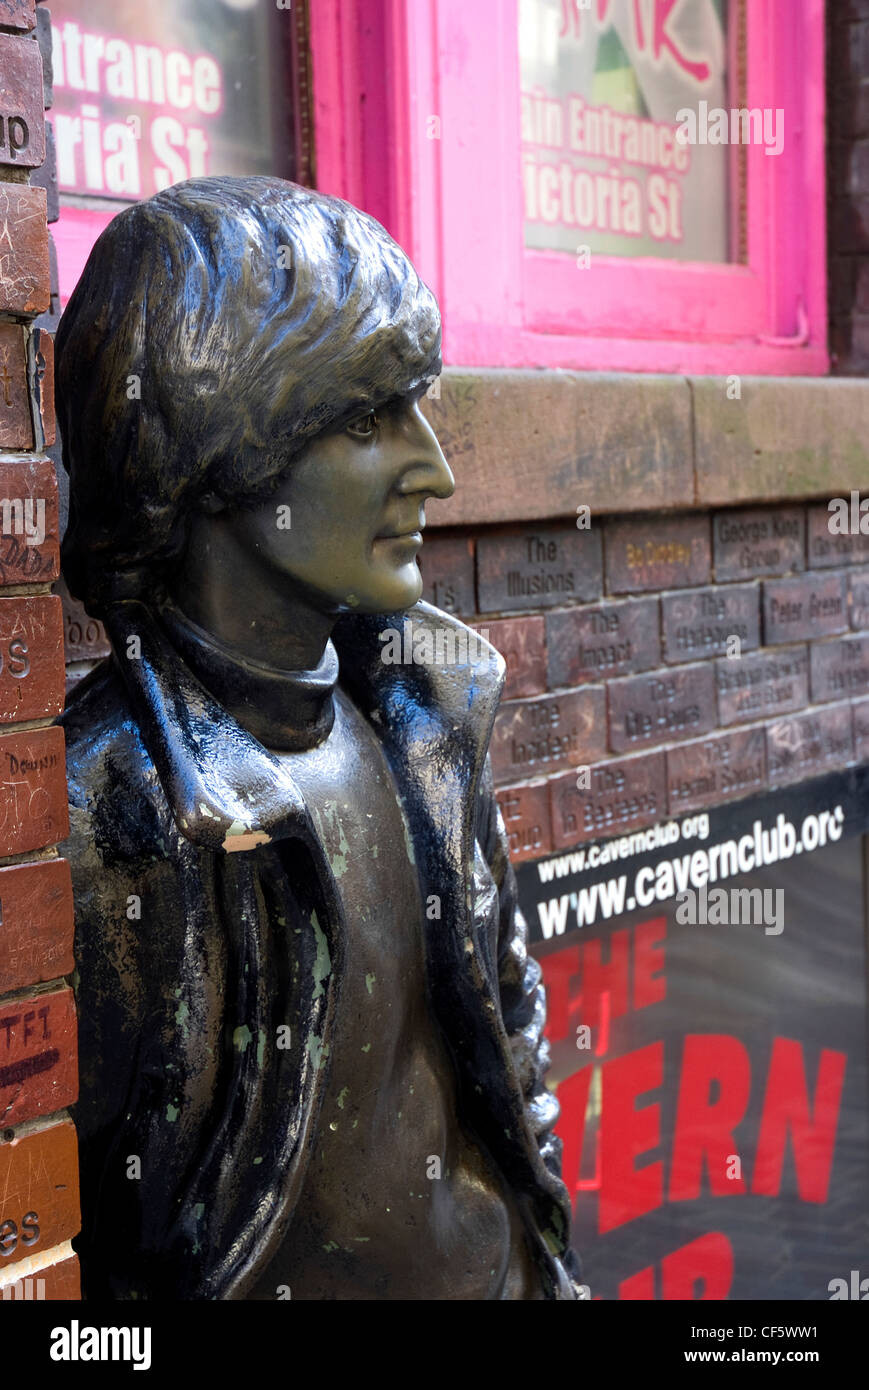 Statue of John Lennon outside the Cavern Club, the venue where Brian Epstein first saw The Beatles performing in 1961. Stock Photo